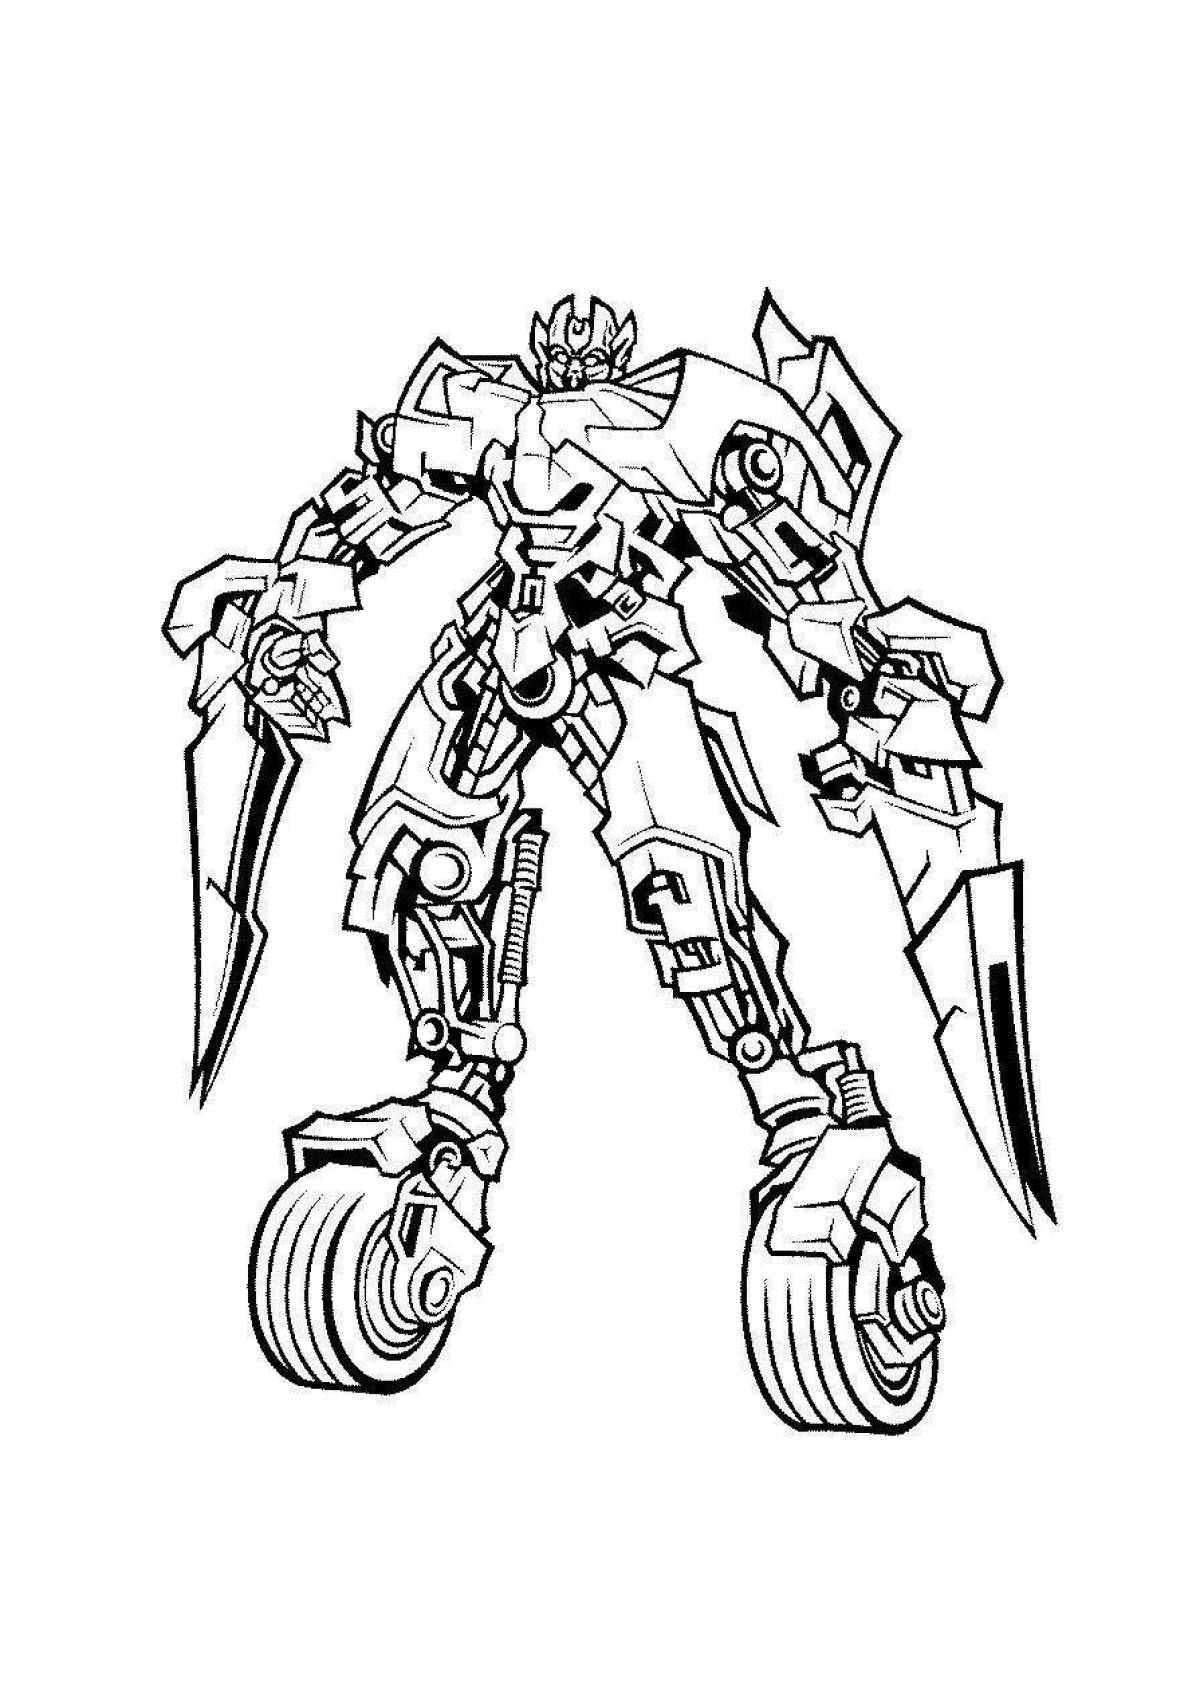 Majestic Decepticons coloring page